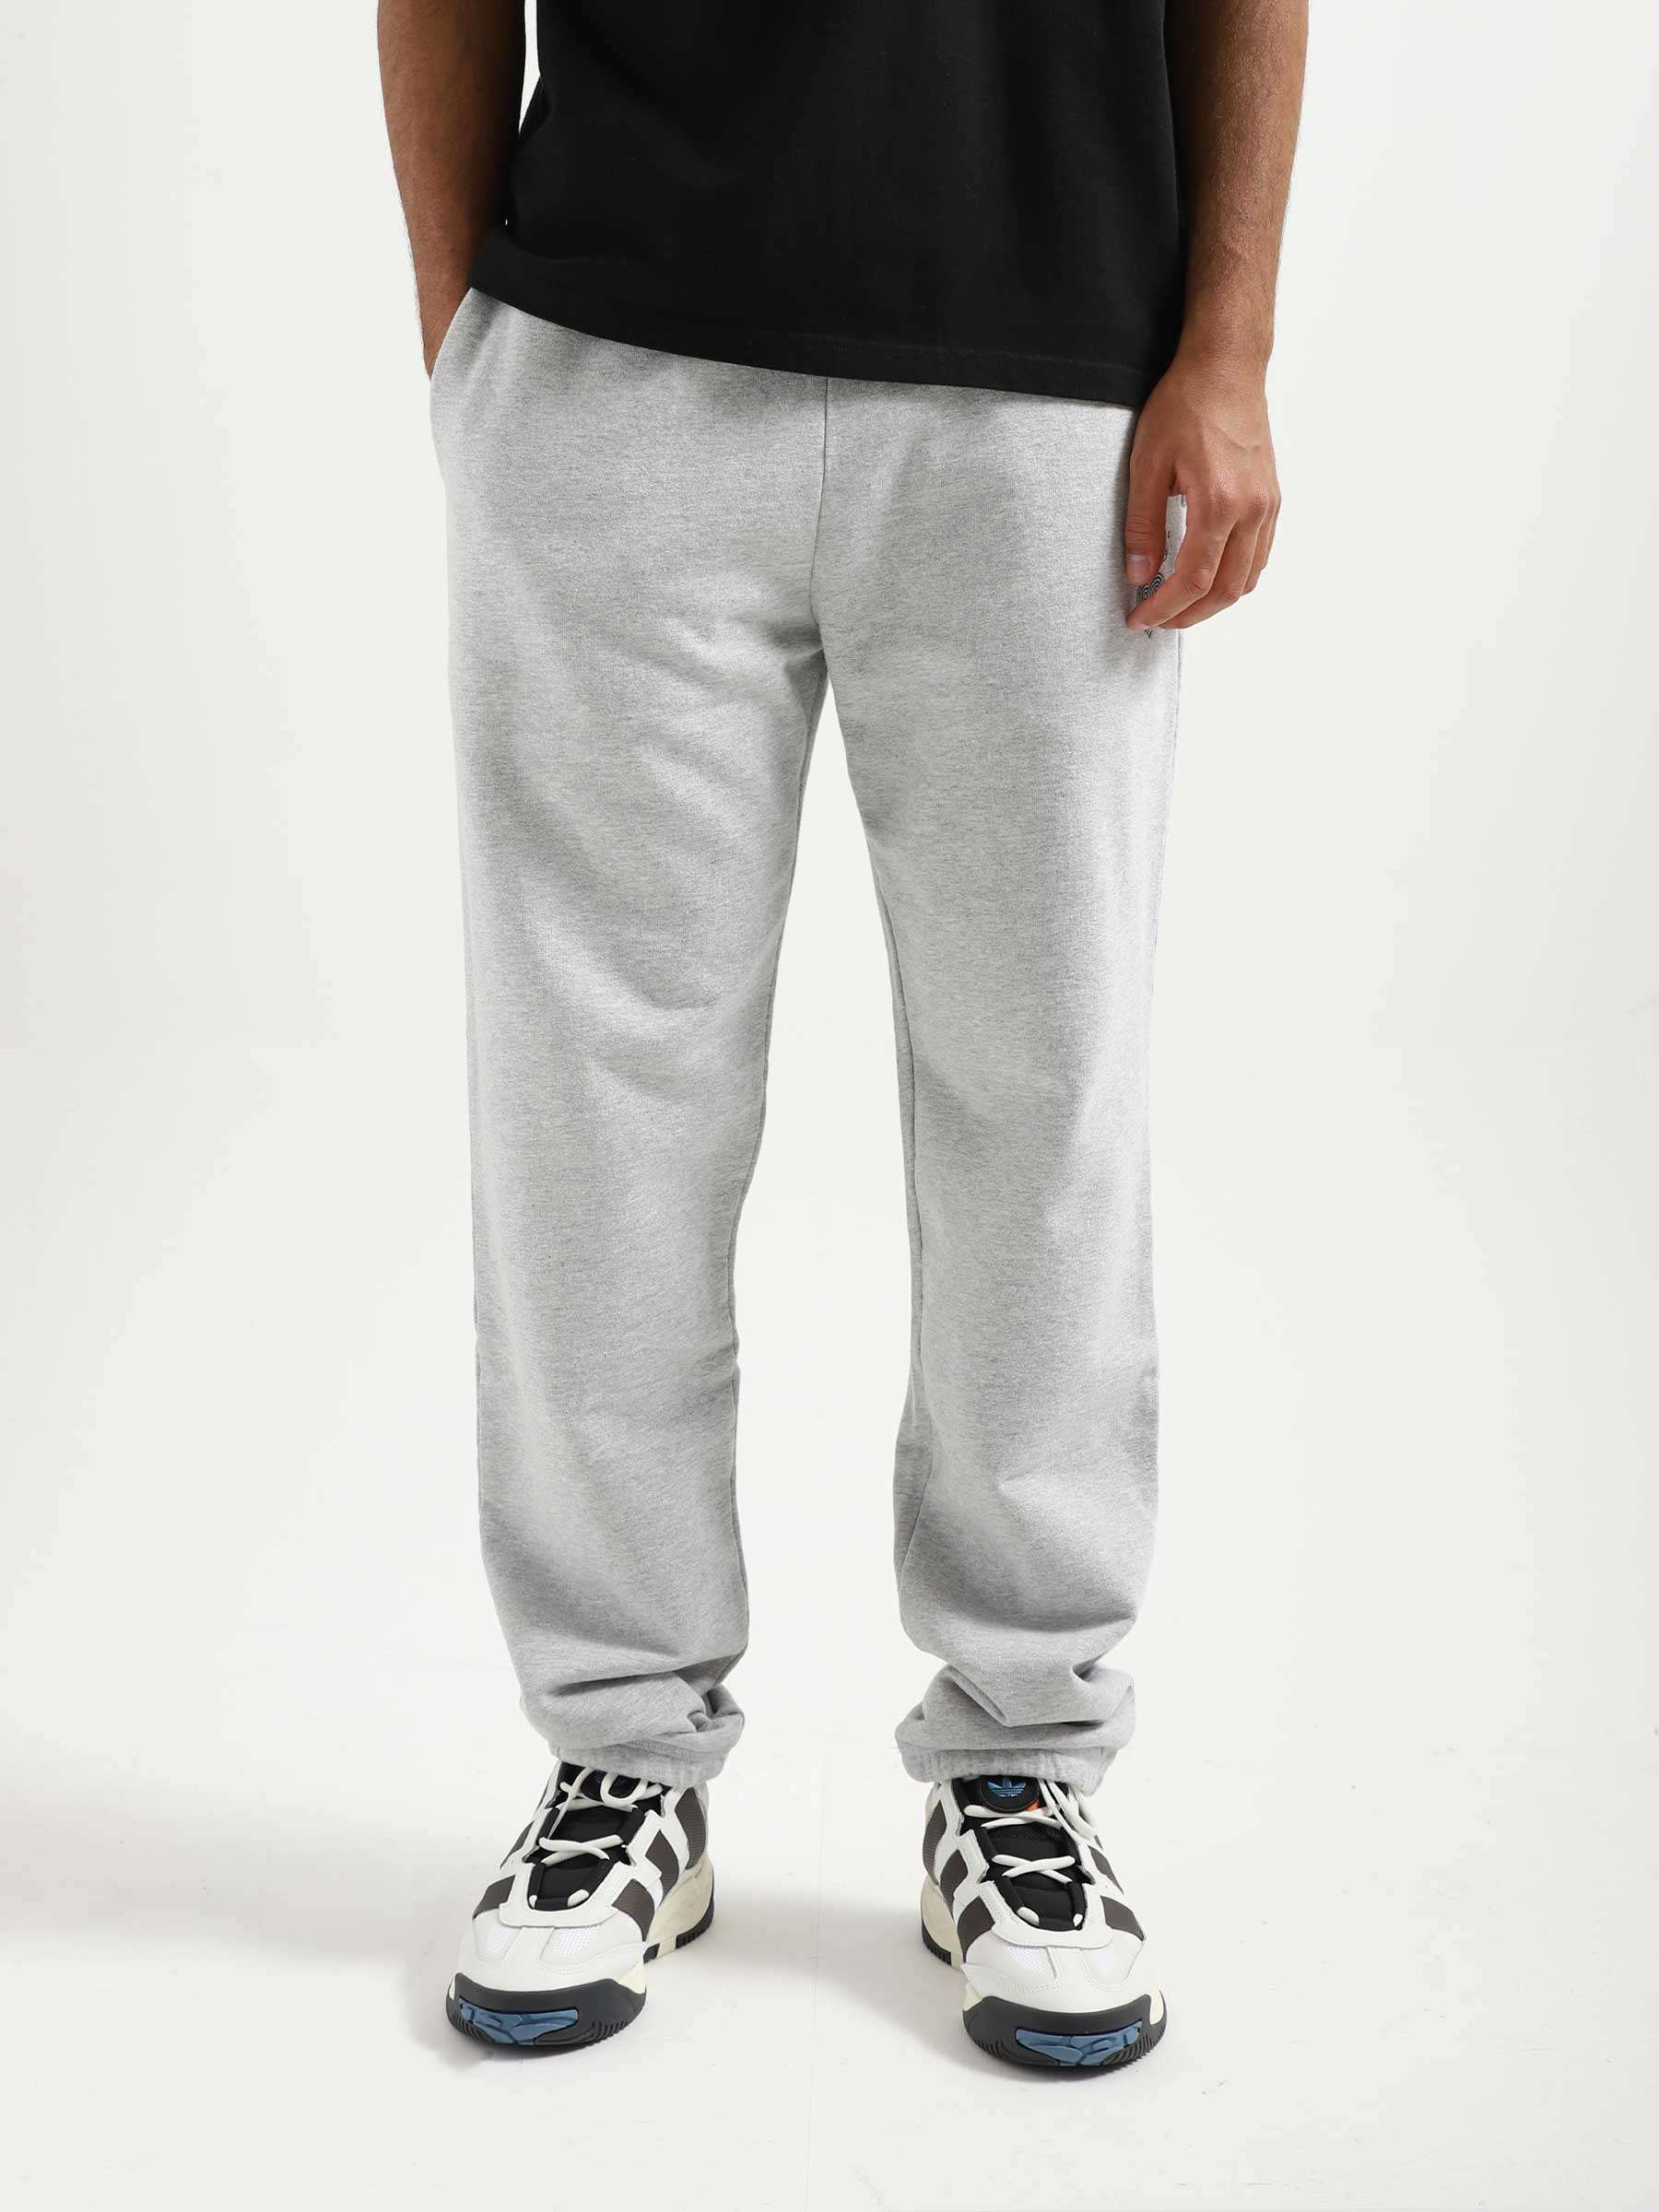 Tristian Heart Patch Pants Grey AW23-049P